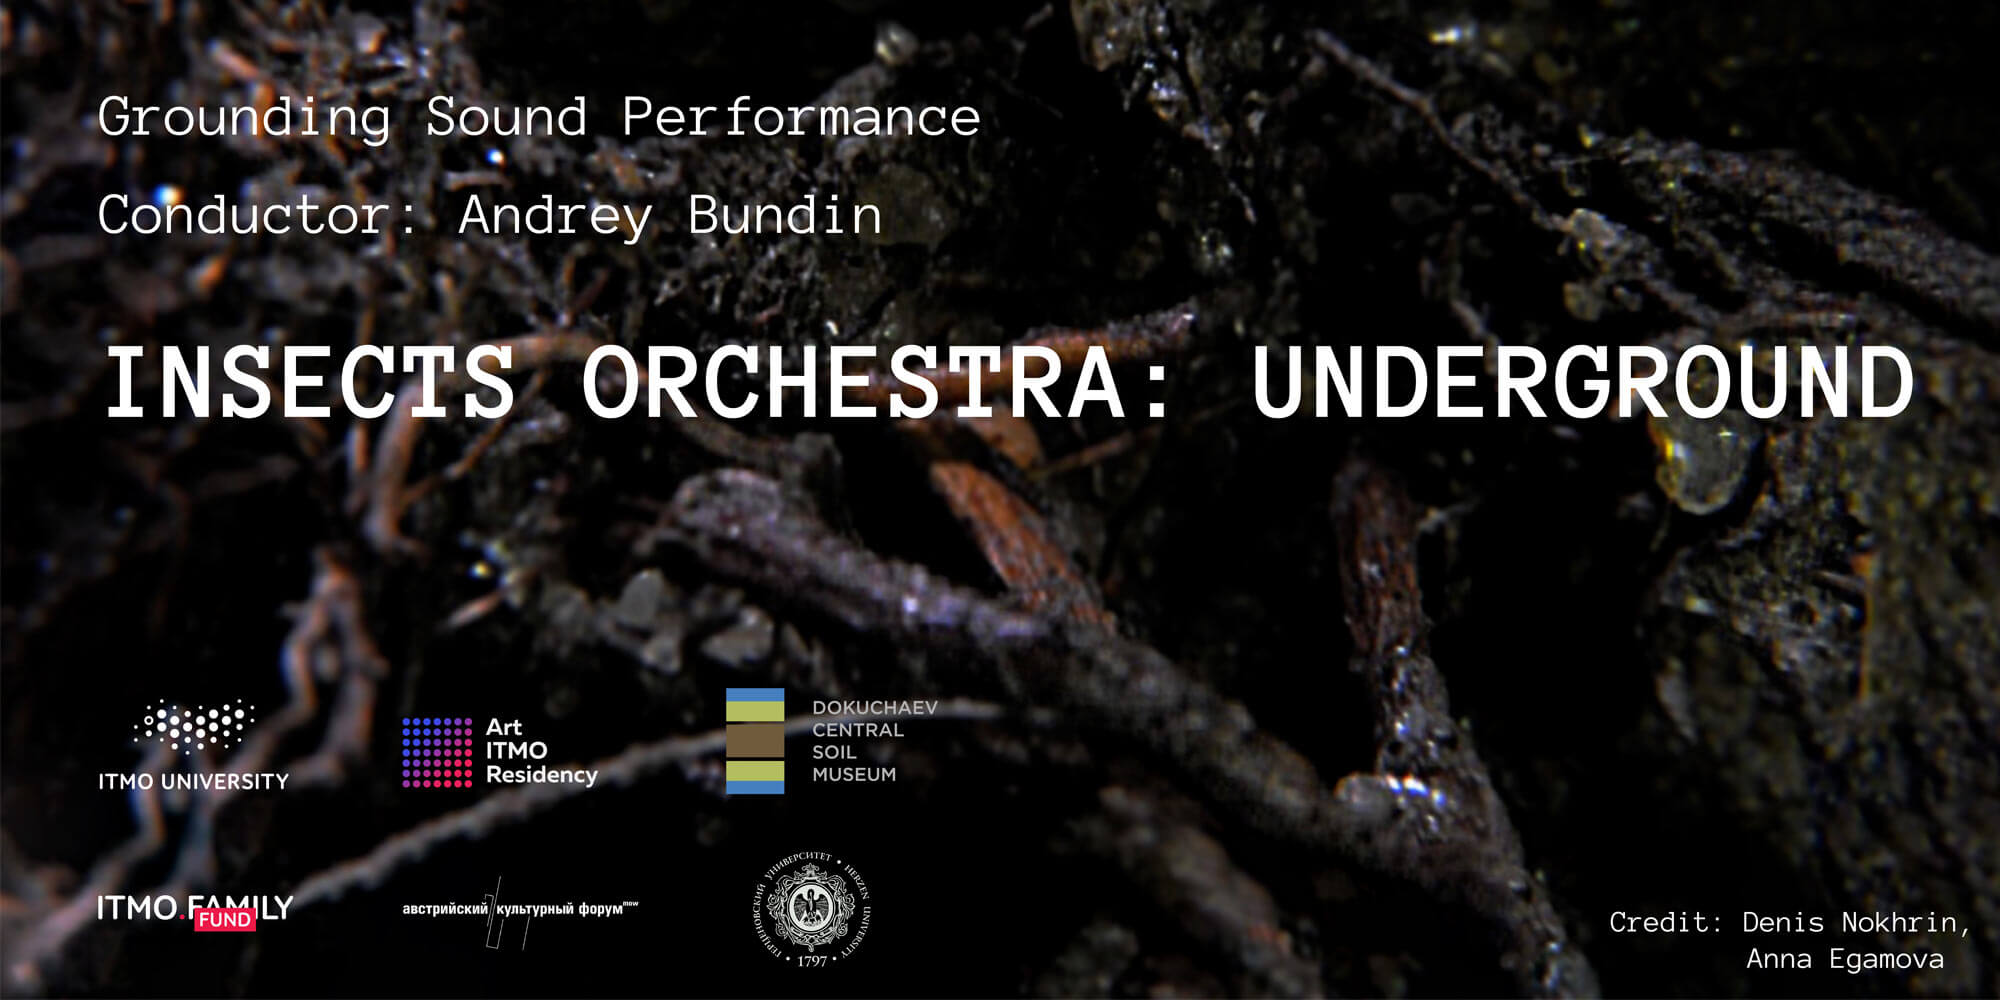 Sound performance “Insects Orchestra: Underground” – A New Digital Deal